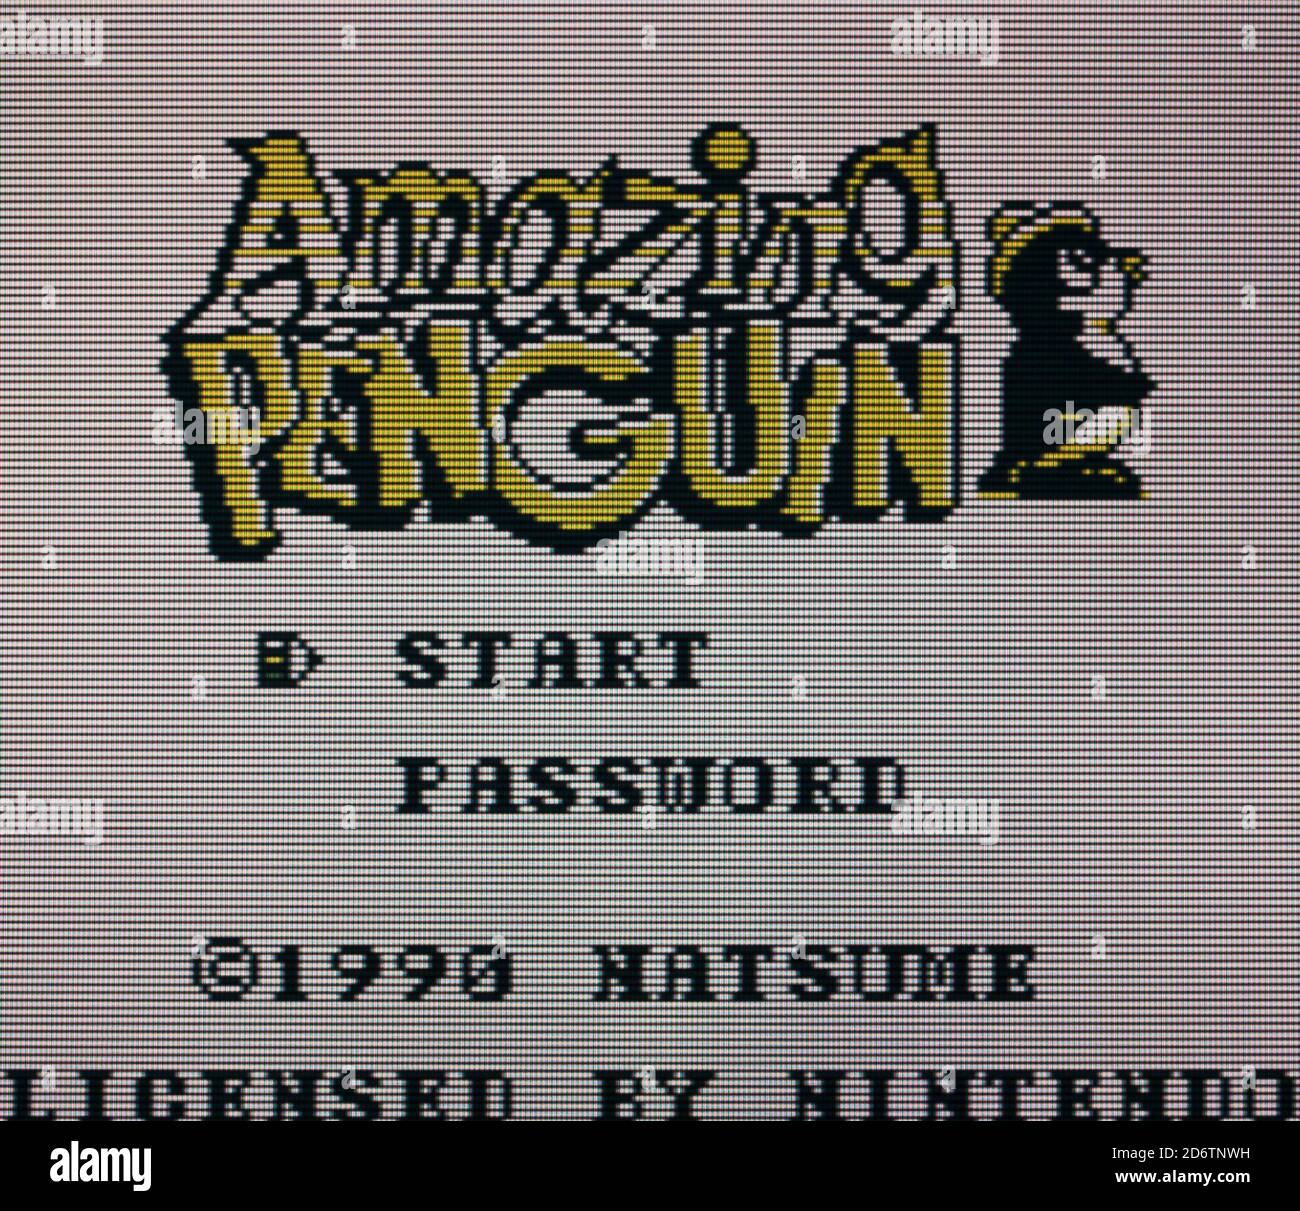 Amazing Penguin - Nintendo Gameboy Videogame - Editorial use only Stock Photo